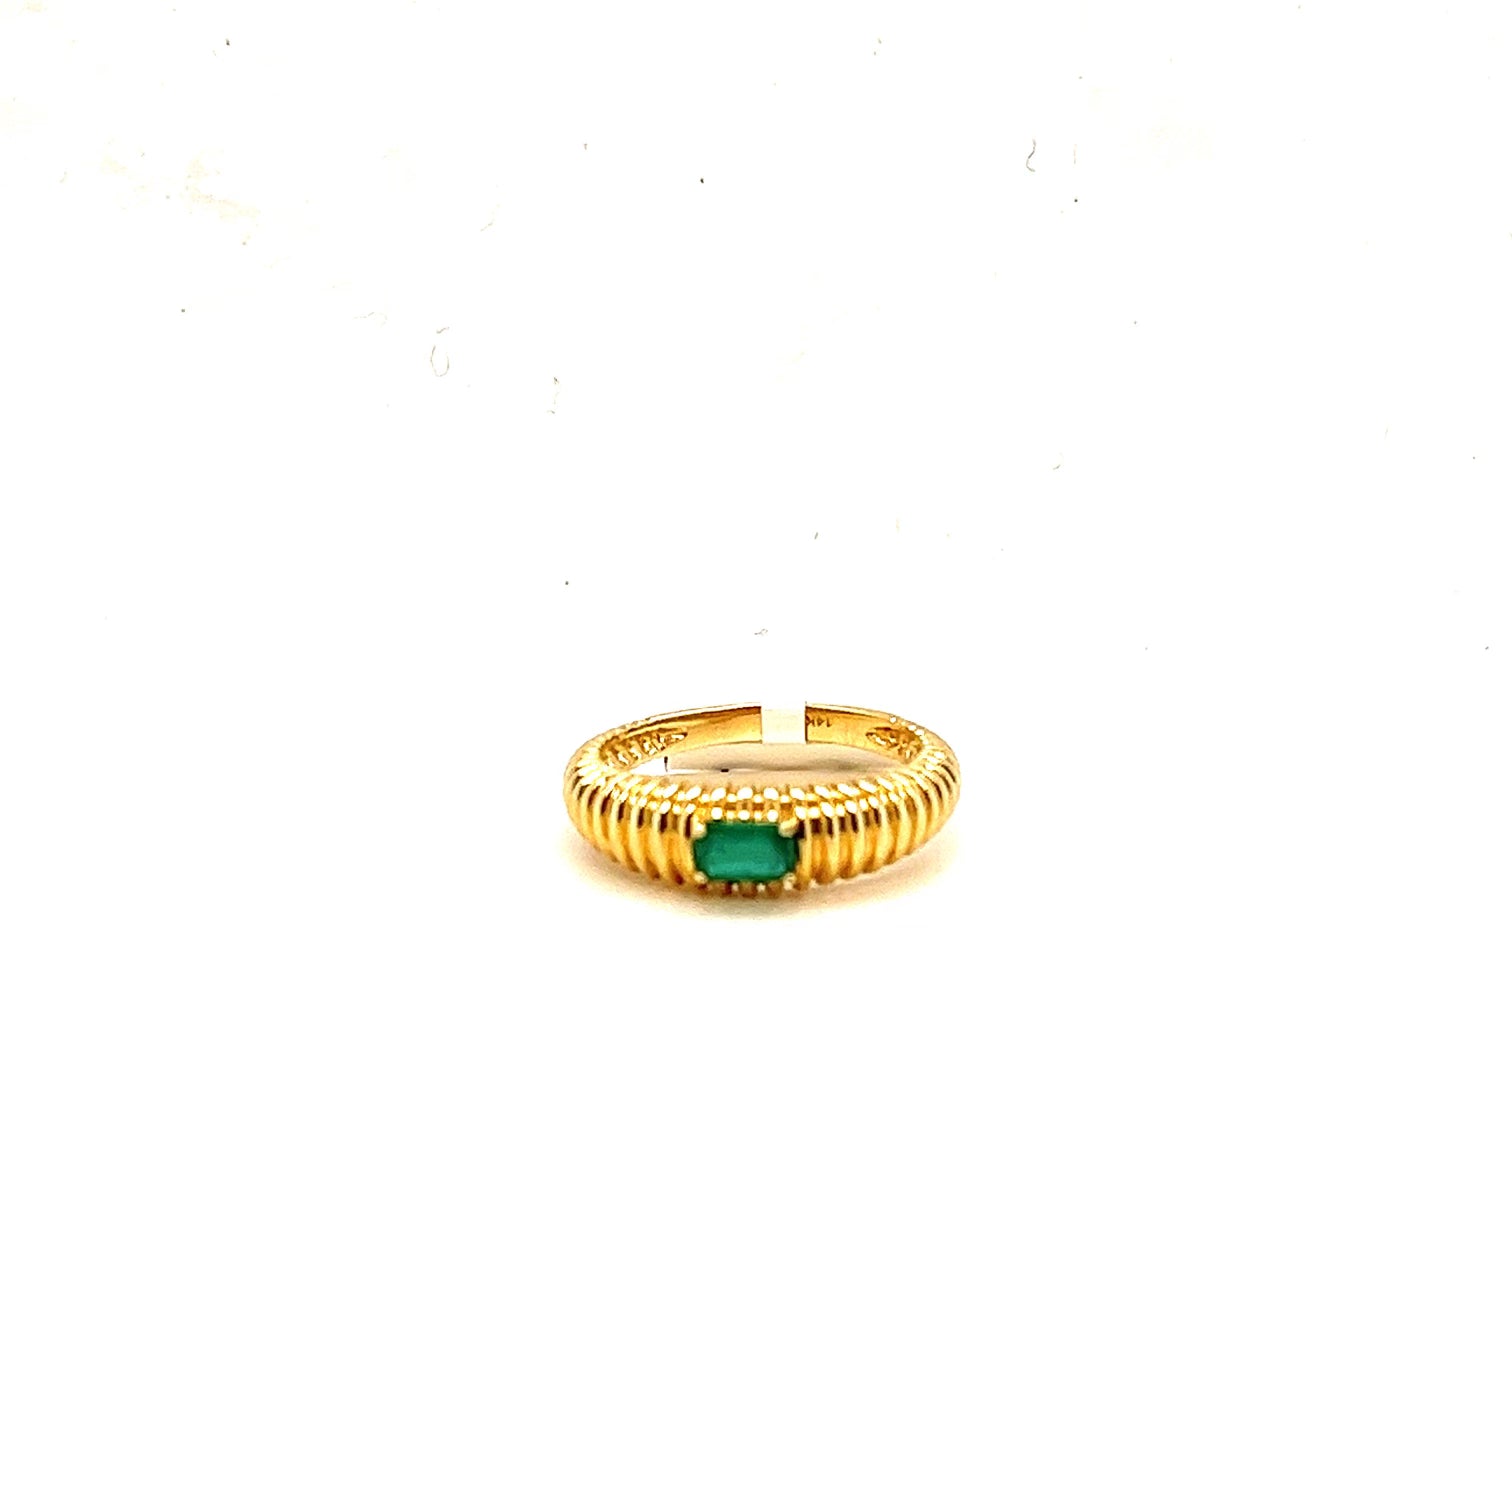 The Gold Coil Ring